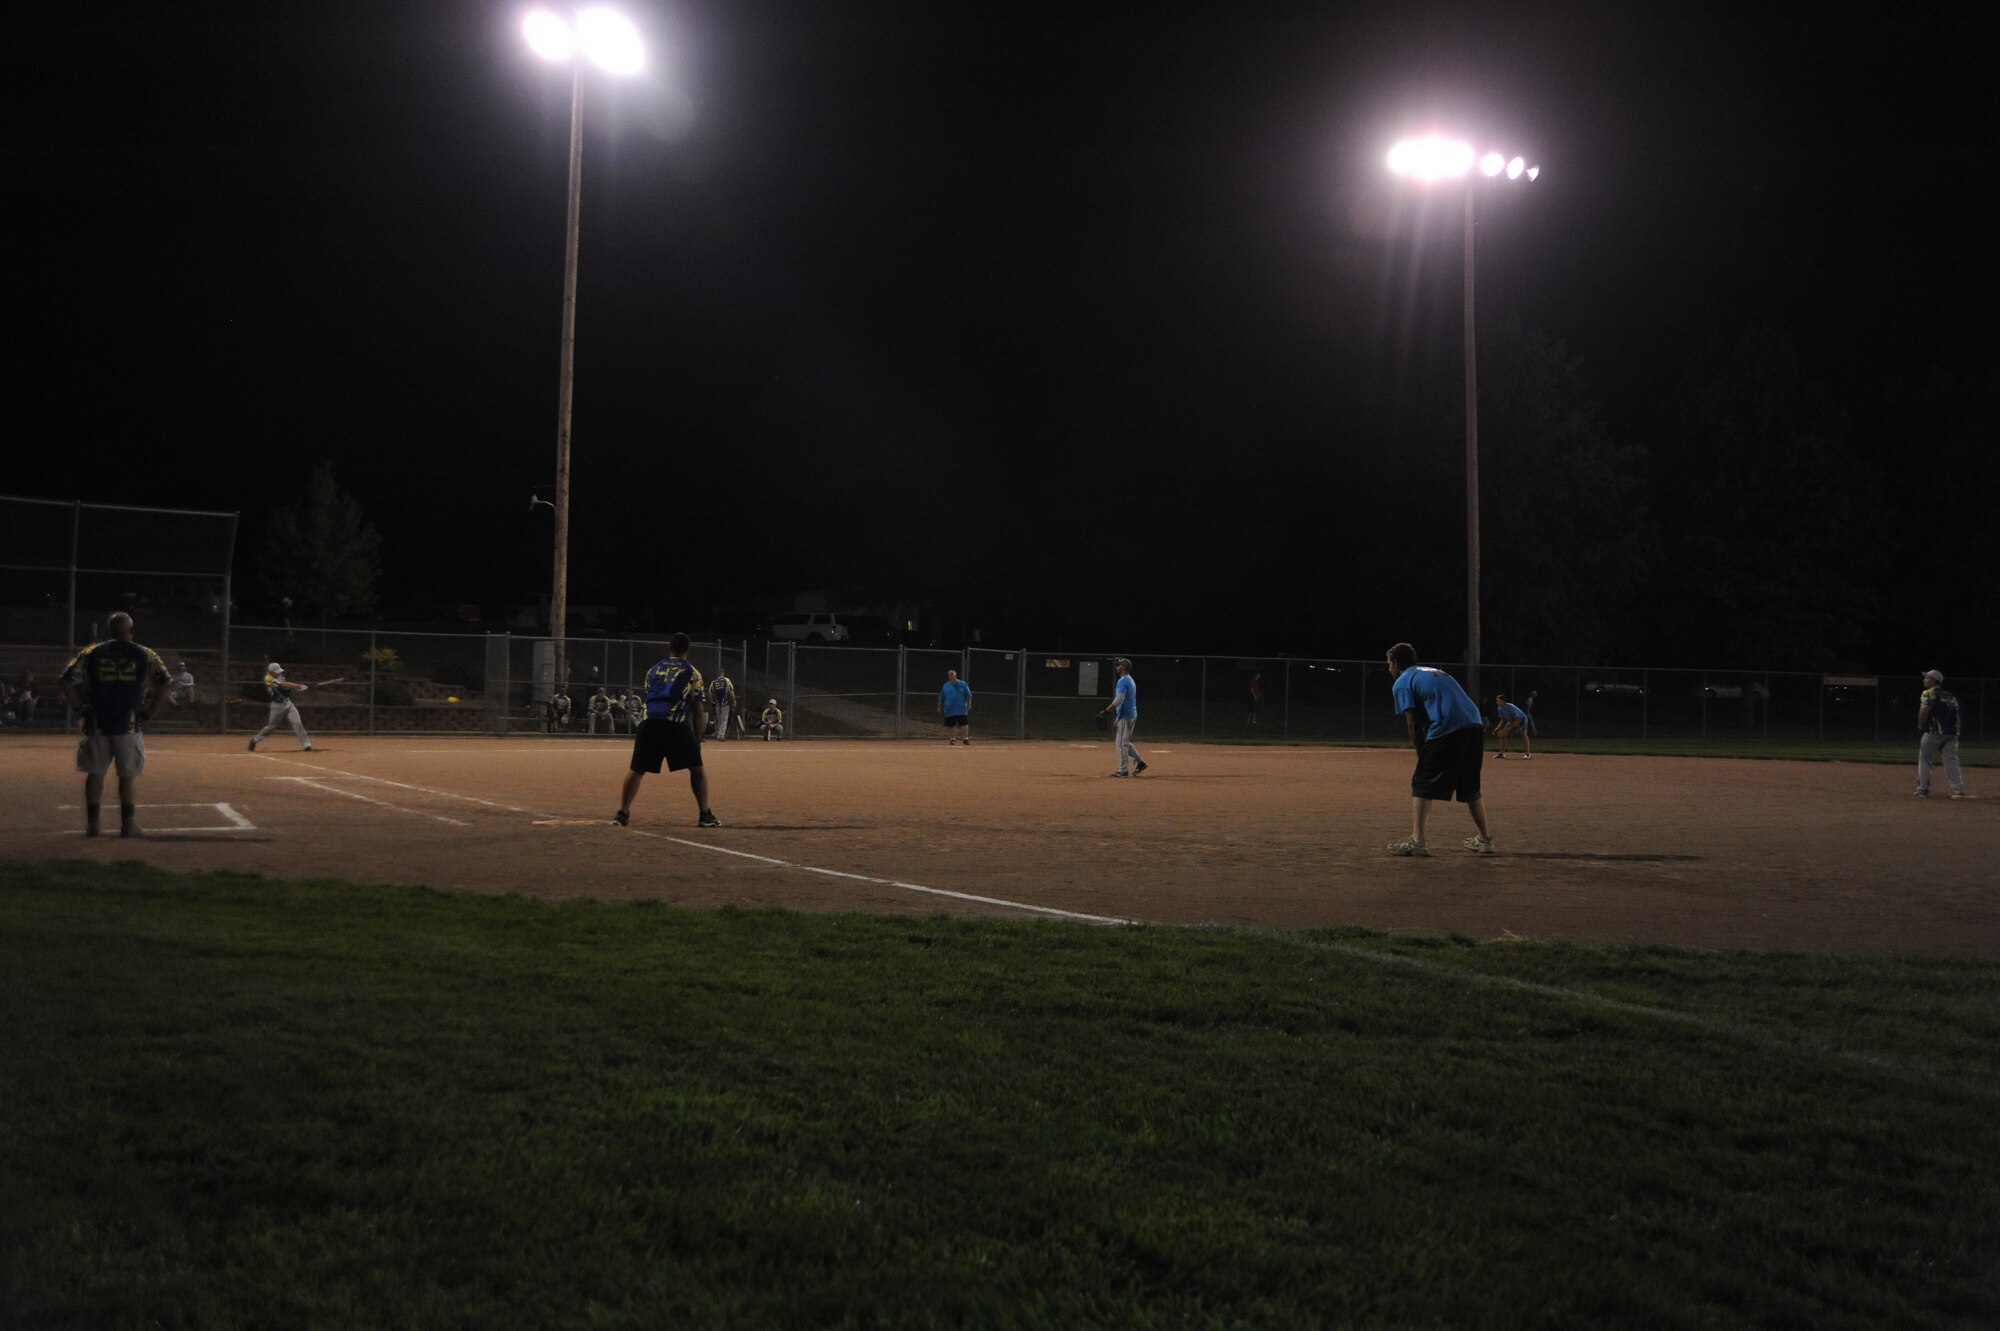 The 509th Security Forces Squadron A-team plays against a local team in Warrensburg, Mo., Sept. 27, 2013, in preparation for the upcoming All World Sports East Coast Nationals/Military Worlds competition in Georgia. The team was recently named the champion of the Whiteman Air Force Base intramural softball league. (U.S. Air Force photo by Staff Sgt. Brigitte N. Brantley/Released)